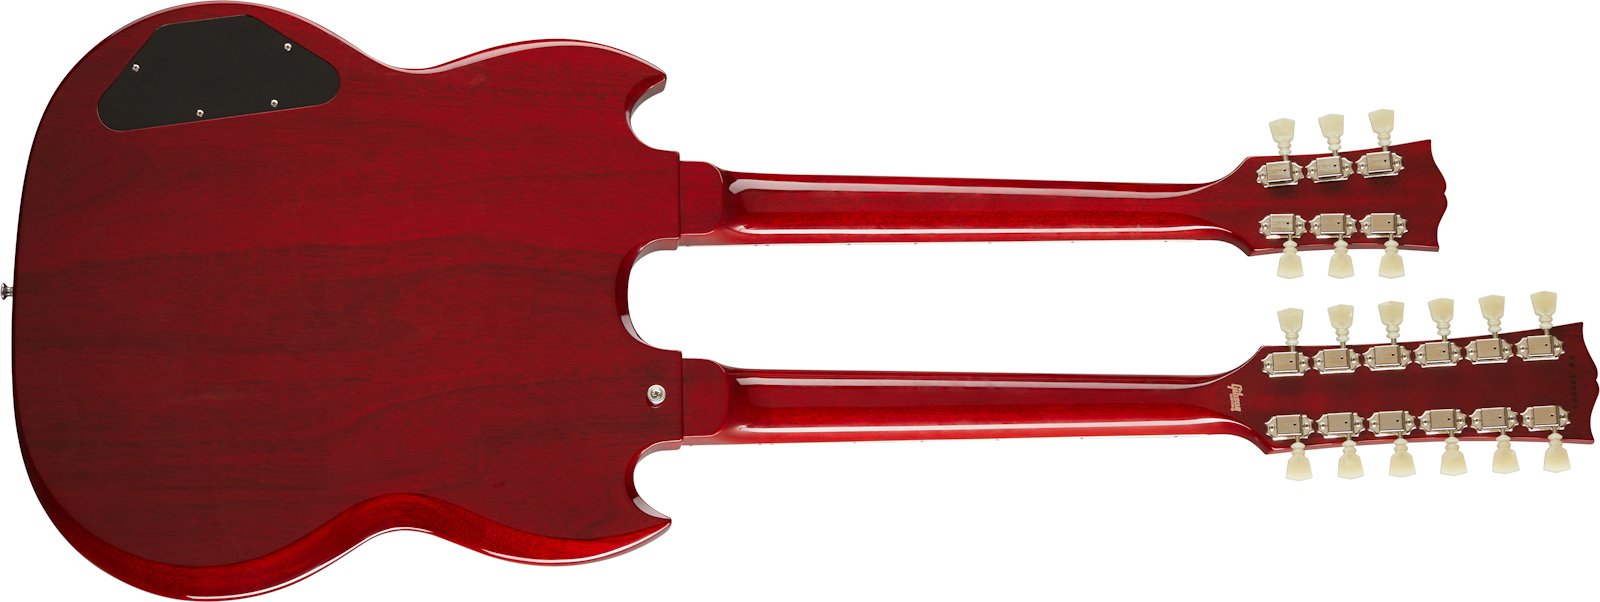 Gibson Custom Shop Eds-1275 Double Neck 2h Ht Rw - Cherry Red - Double neck guitar - Variation 1